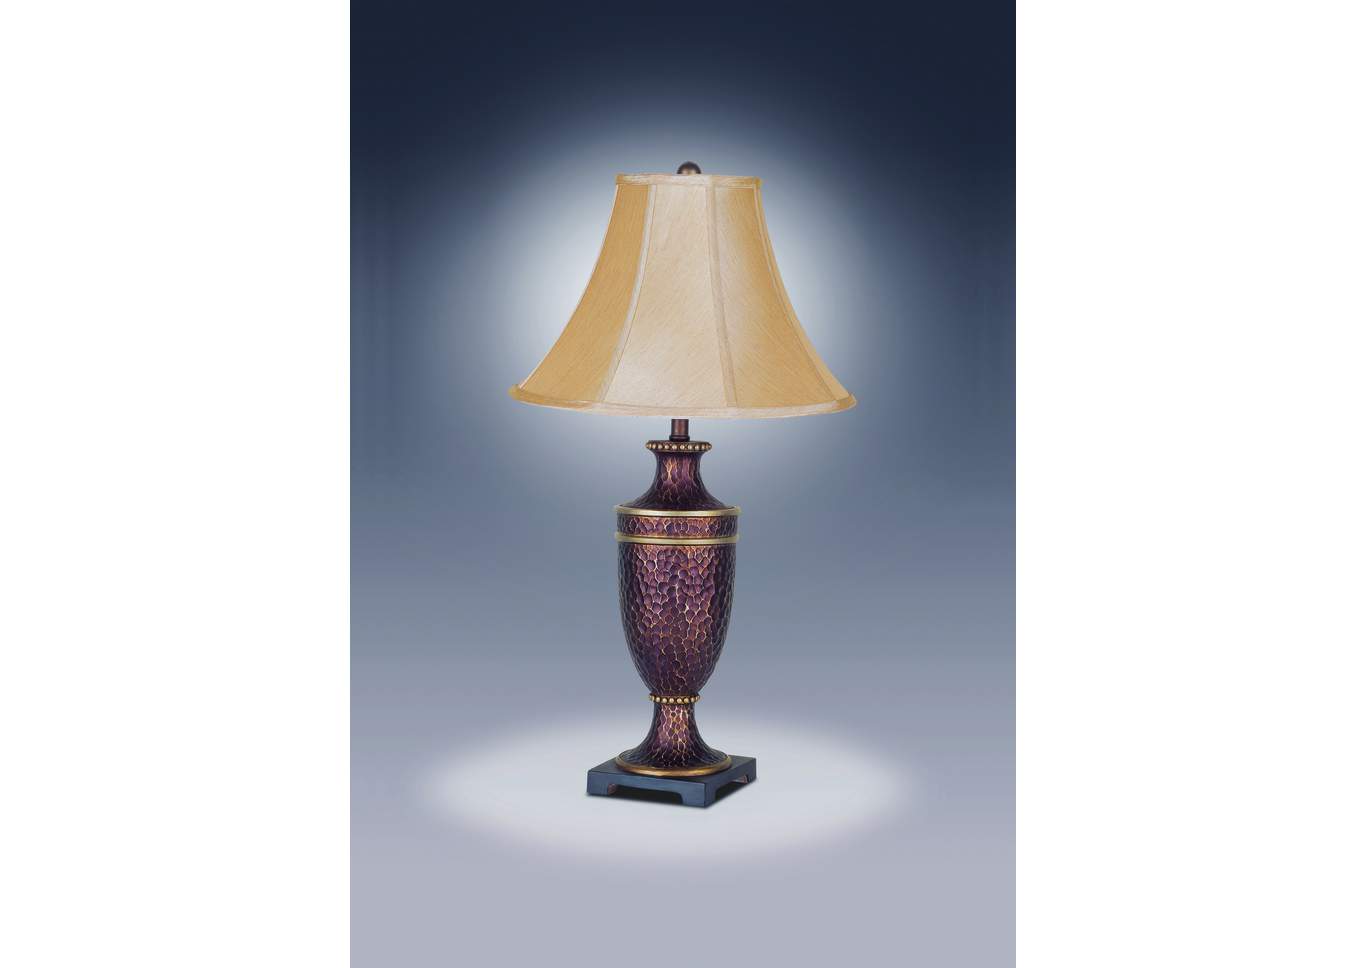 HAMMERED URM LAMP with Bell shade,Crown Mark